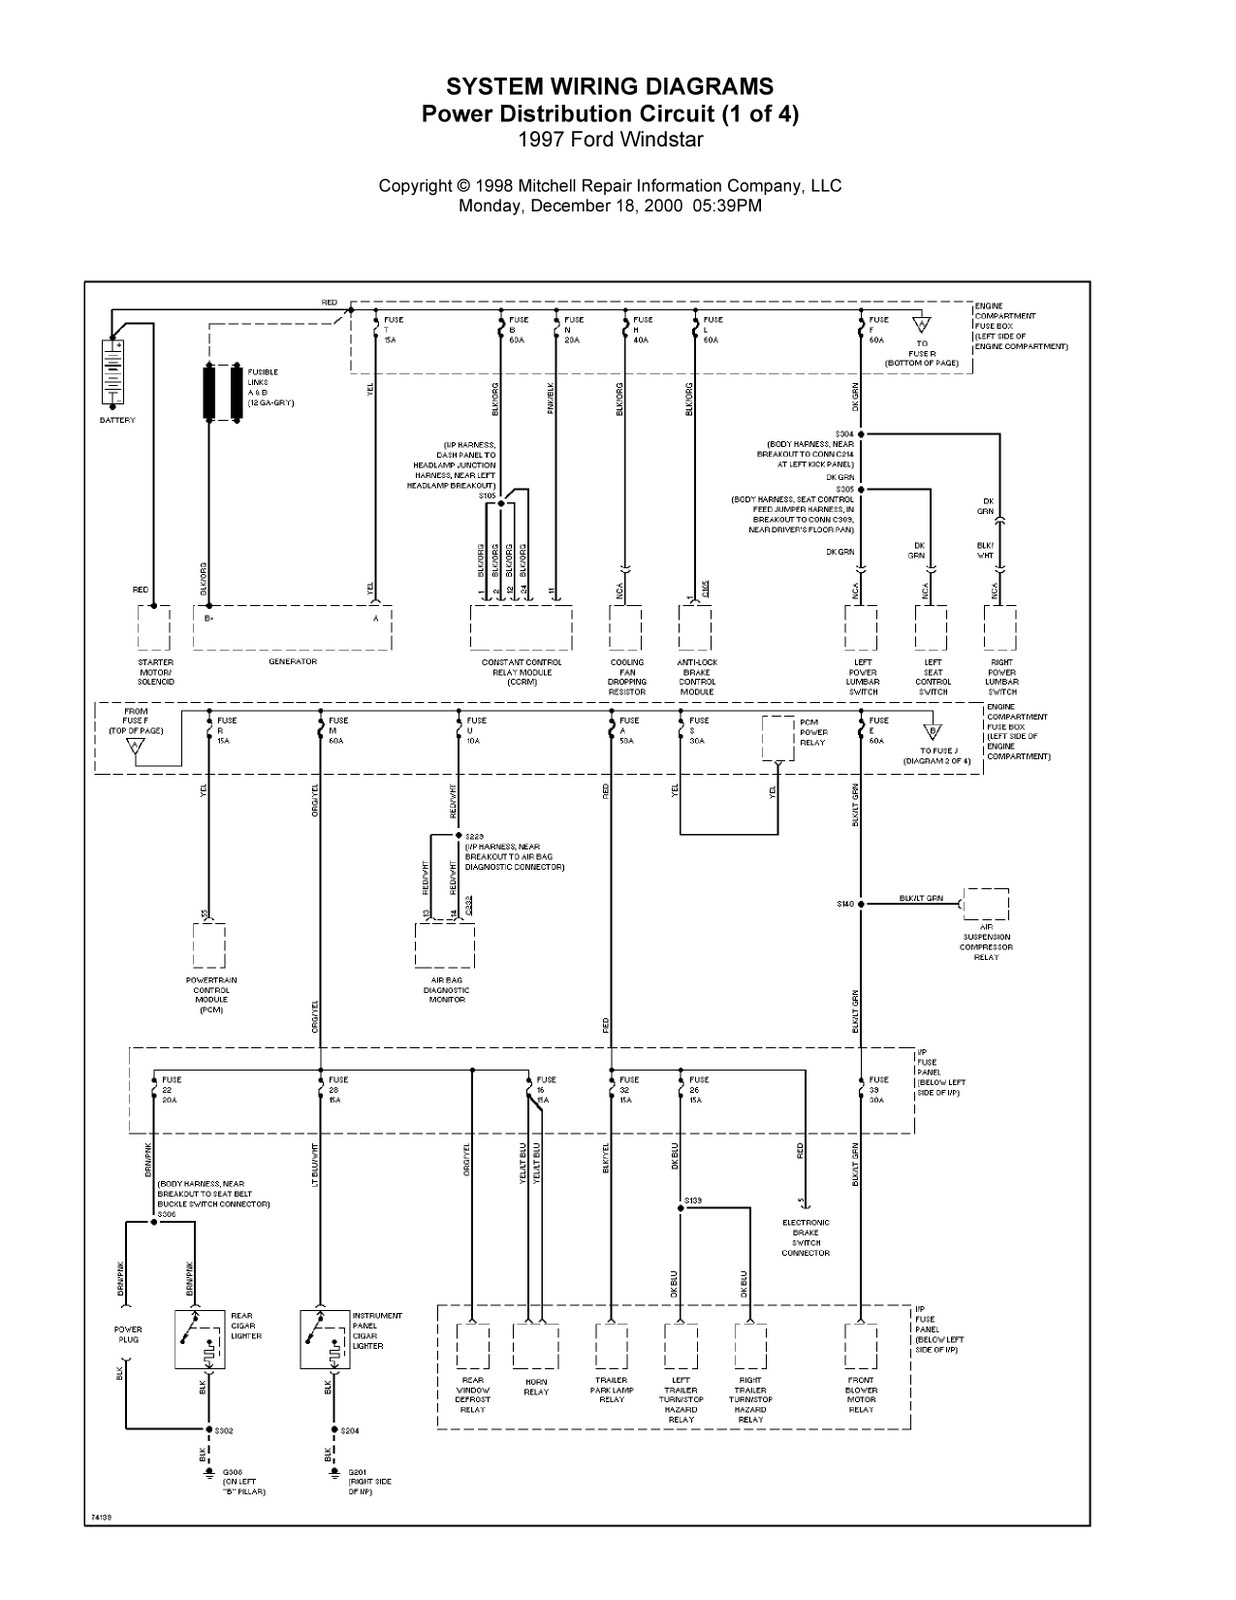 1997 Ford Windstar Complete System Wiring Diagrams | Wiring Diagrams Center